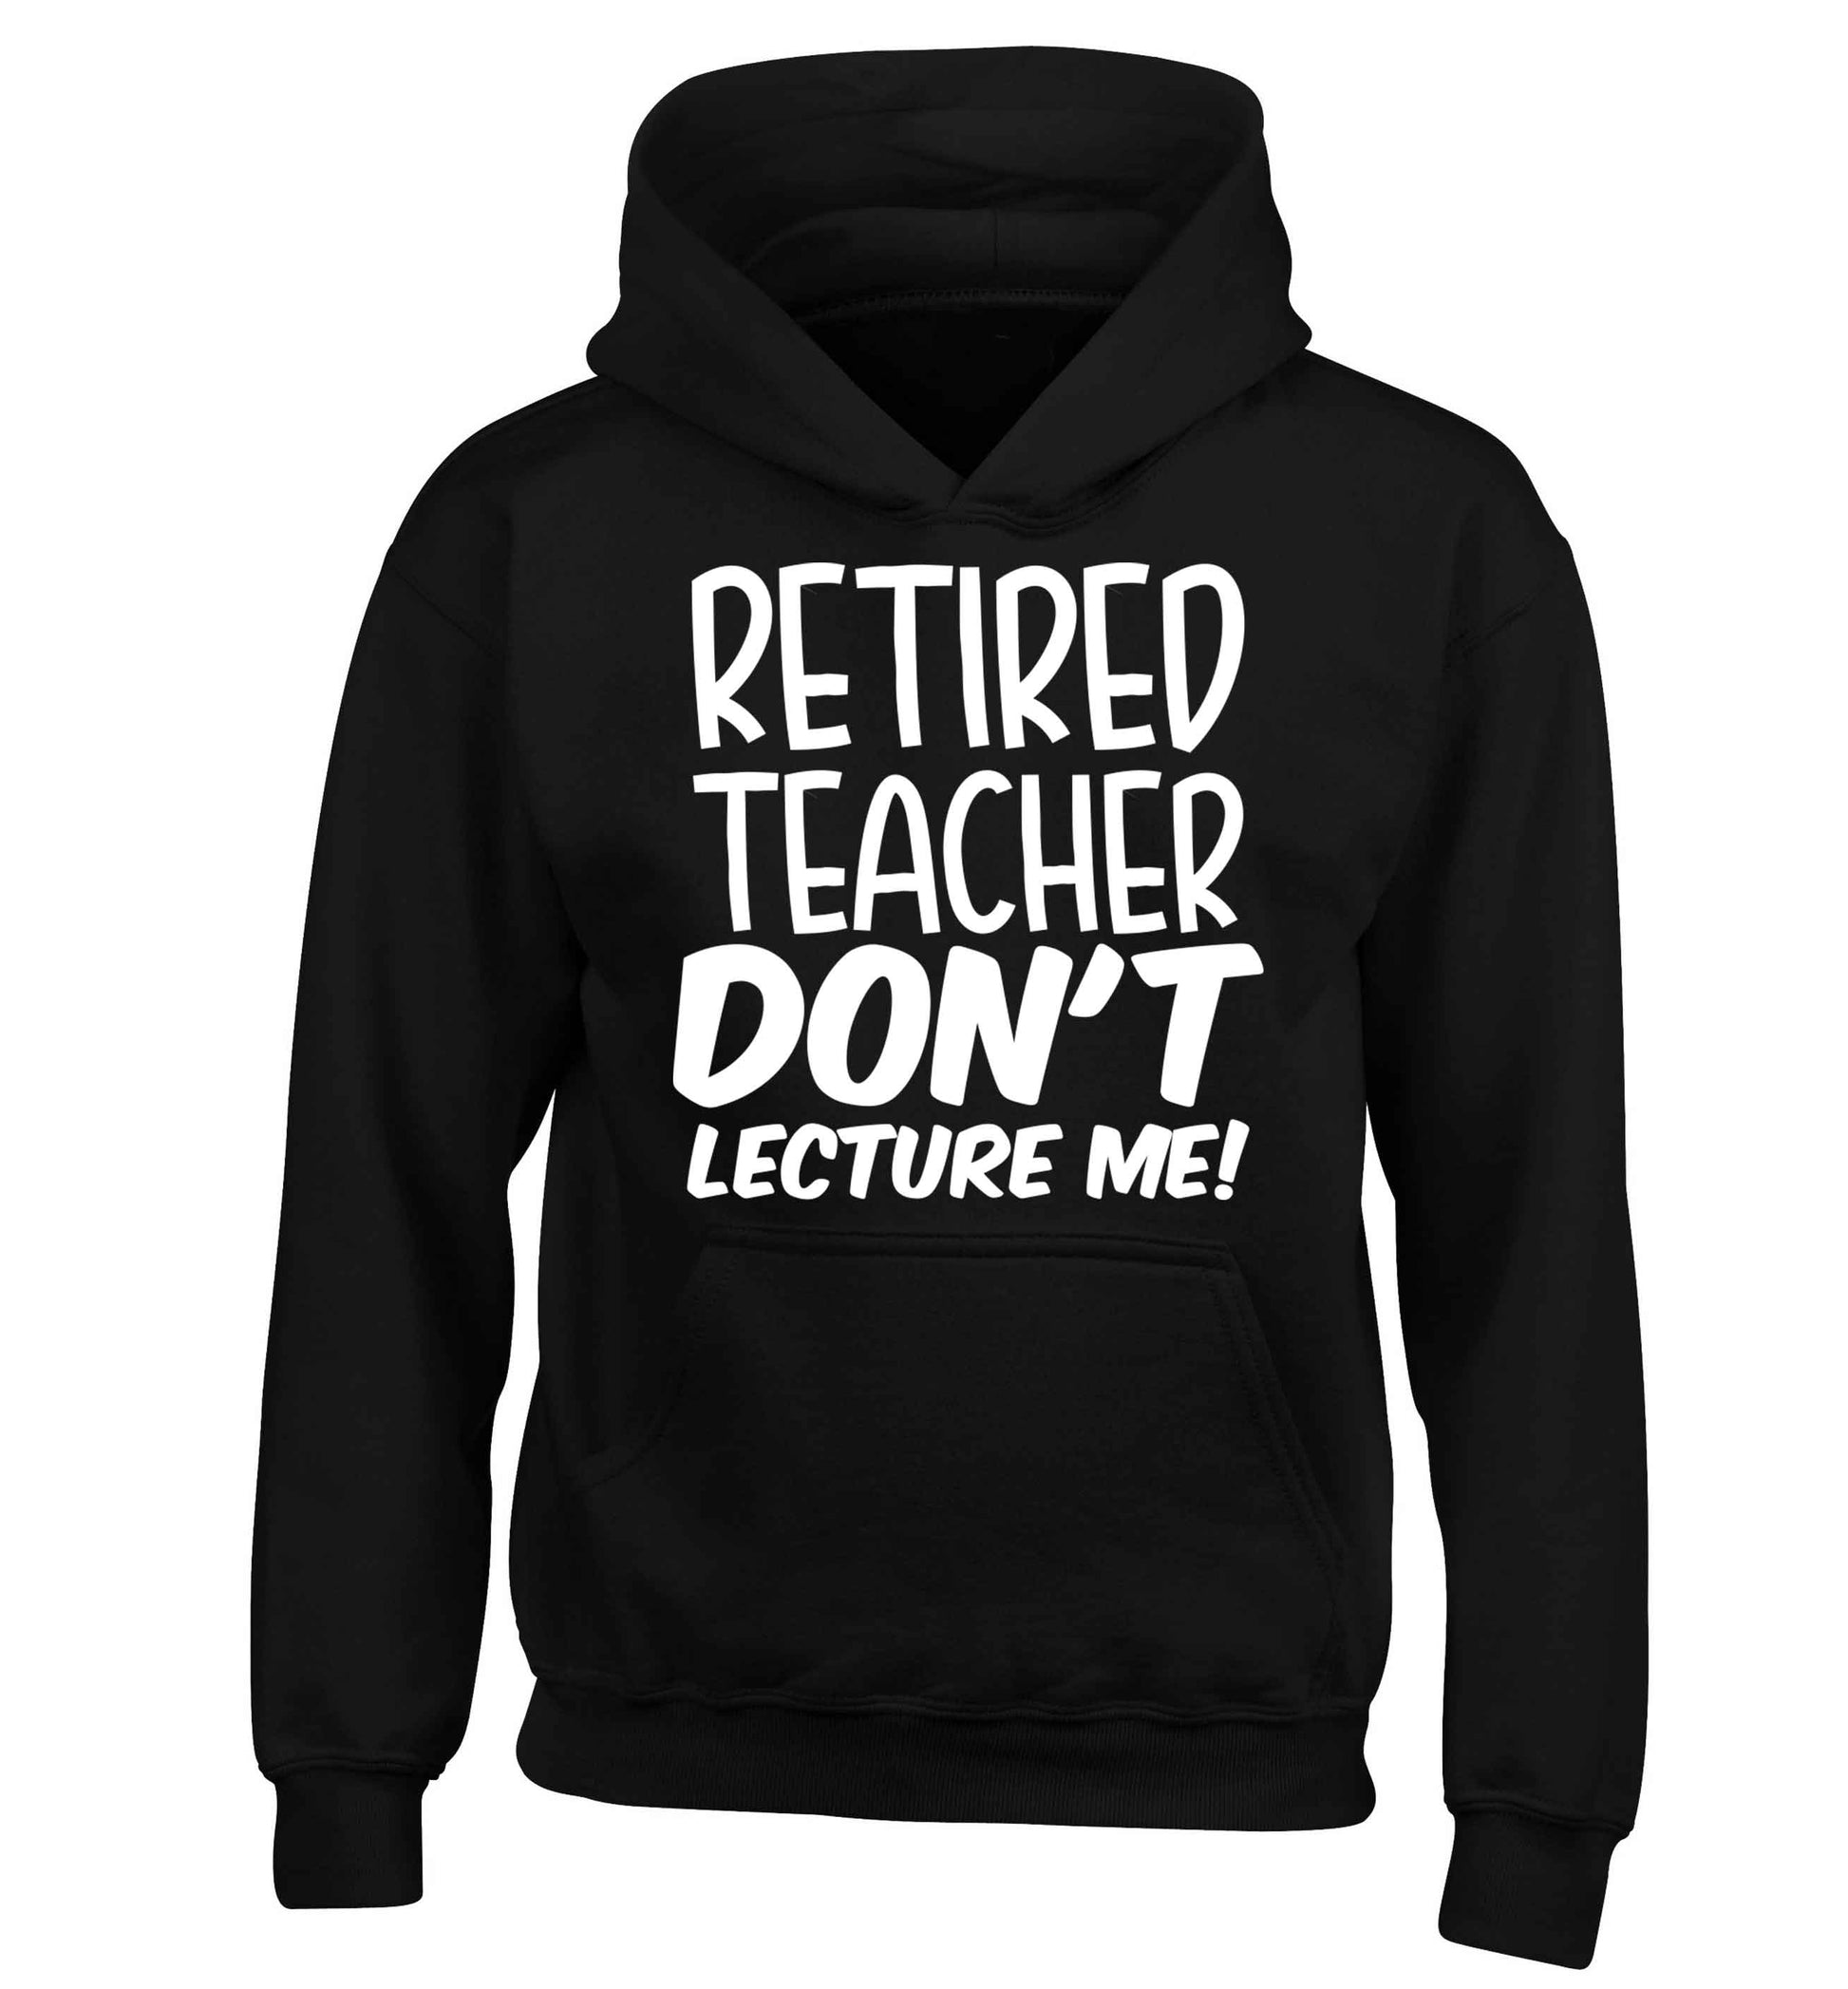 Retired teacher don't lecture me! children's black hoodie 12-13 Years